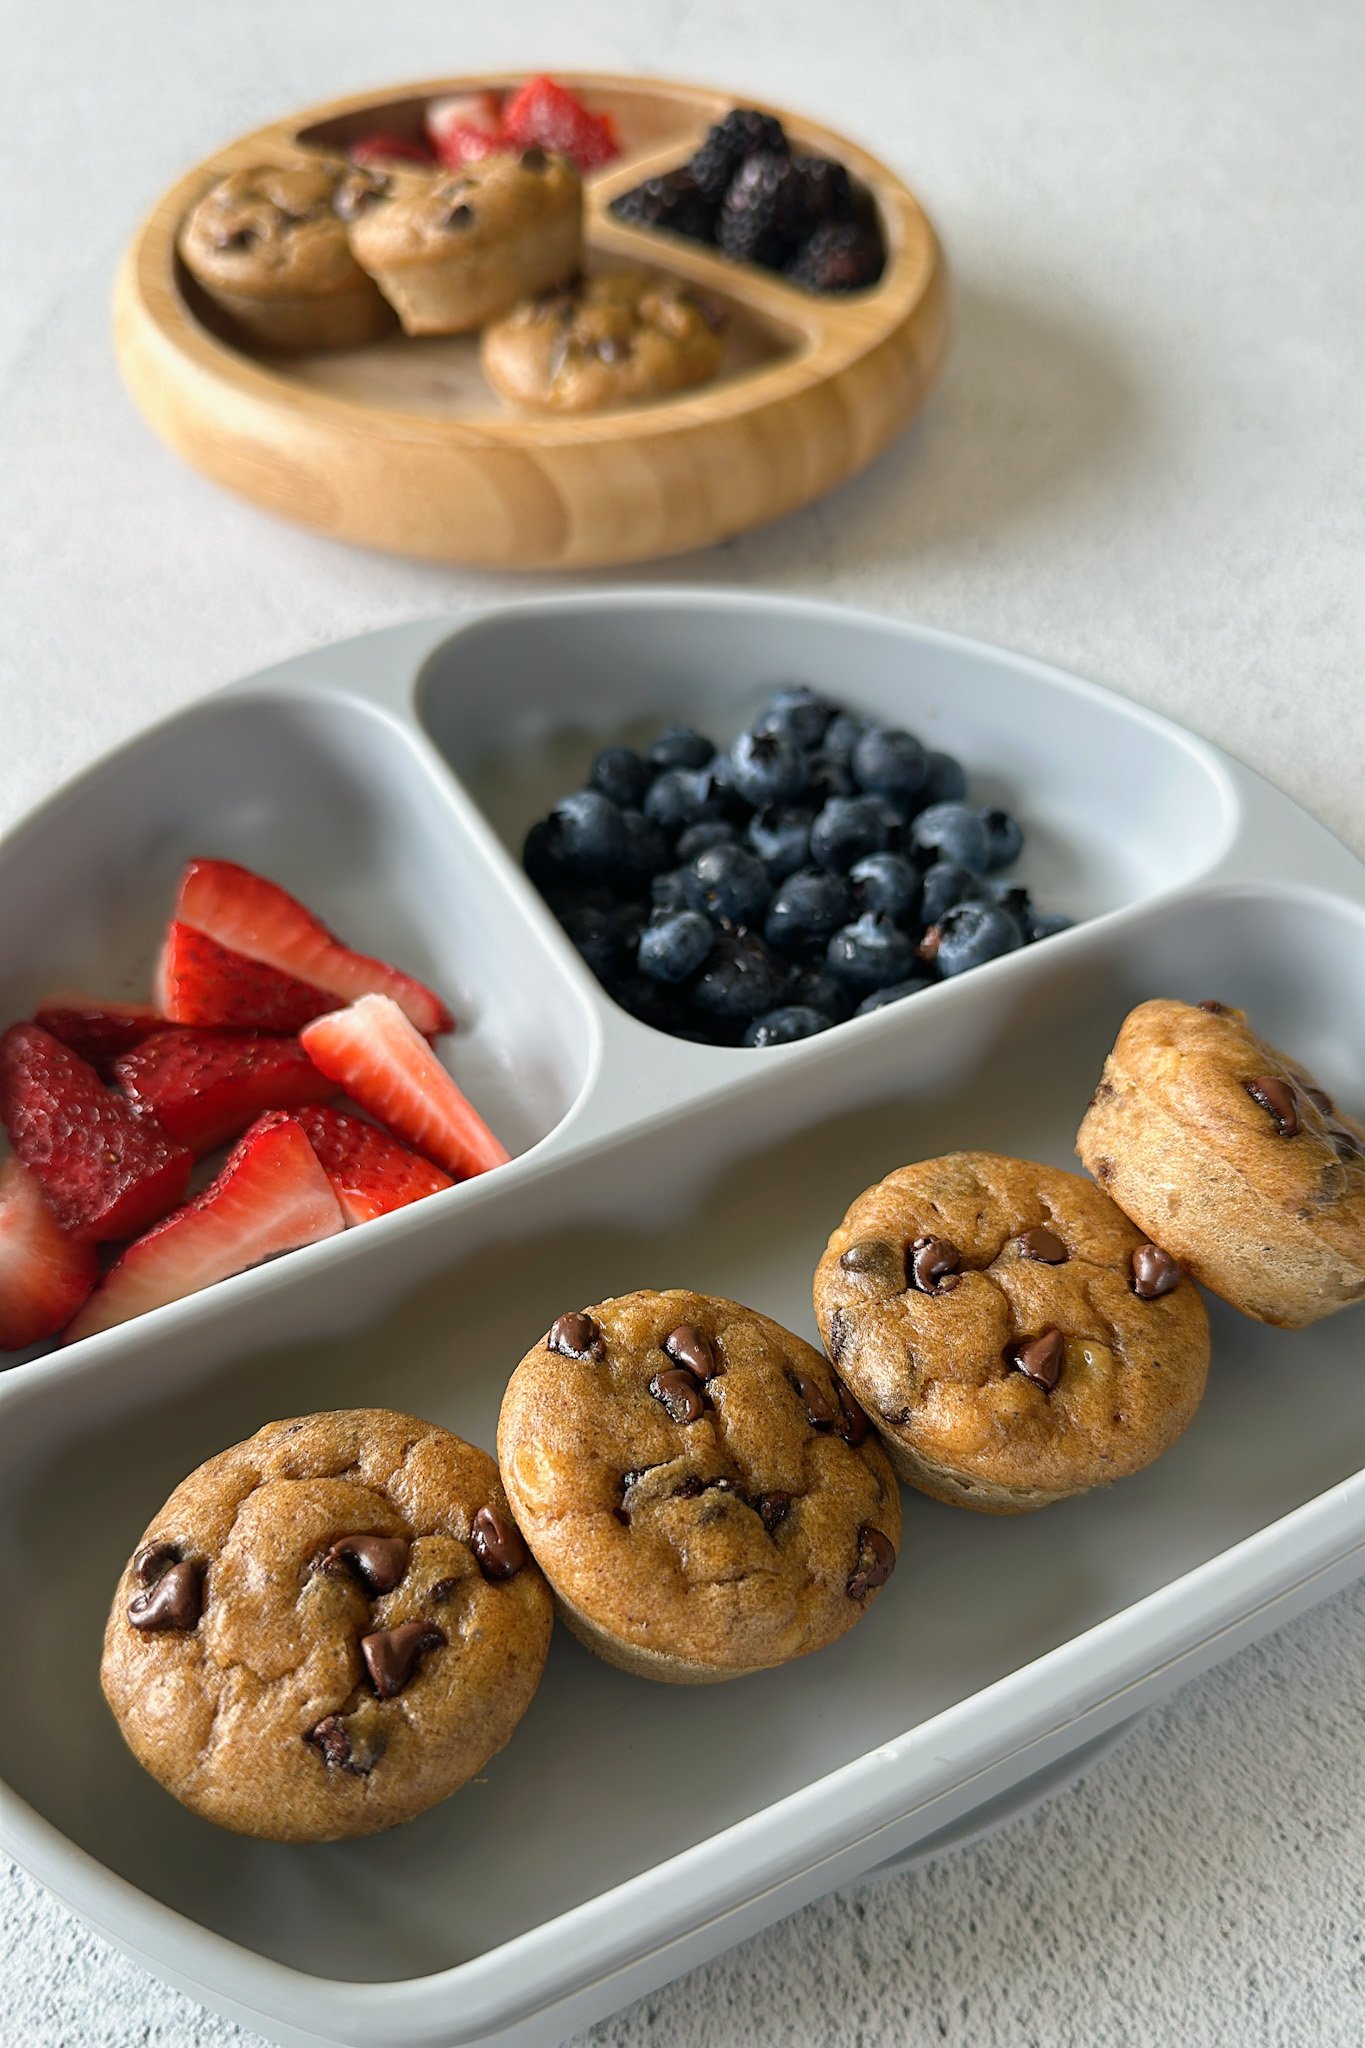 Peanut butter chocolate chip muffins served with berries.